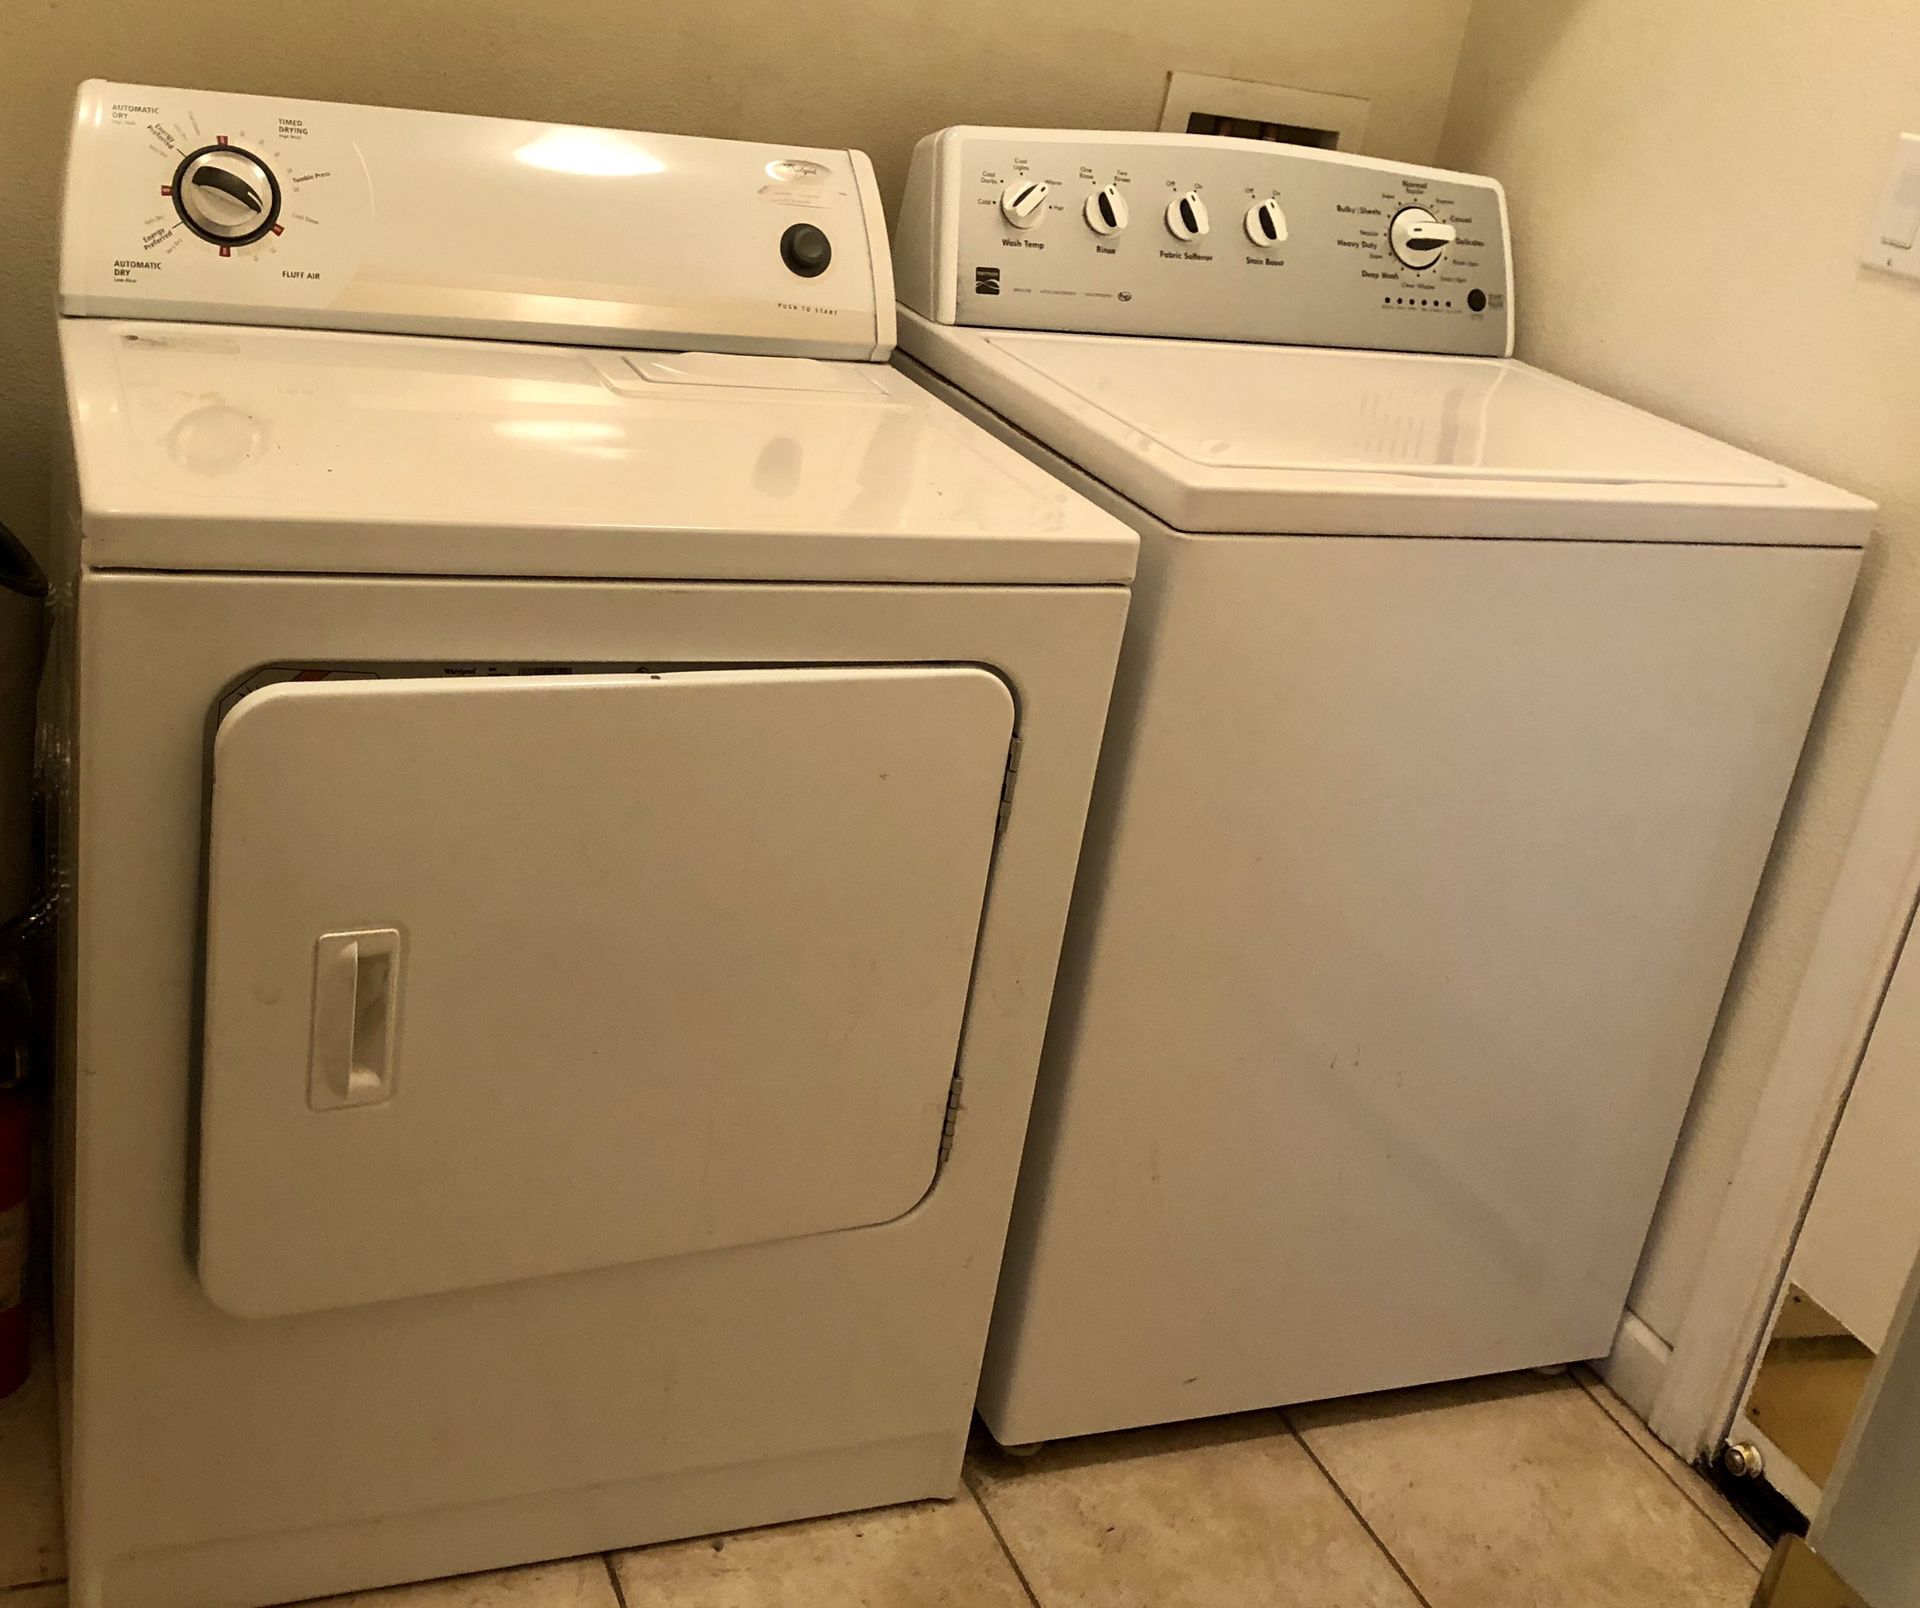 Moving - Kenmore He Washer and Whirlpool Dryer